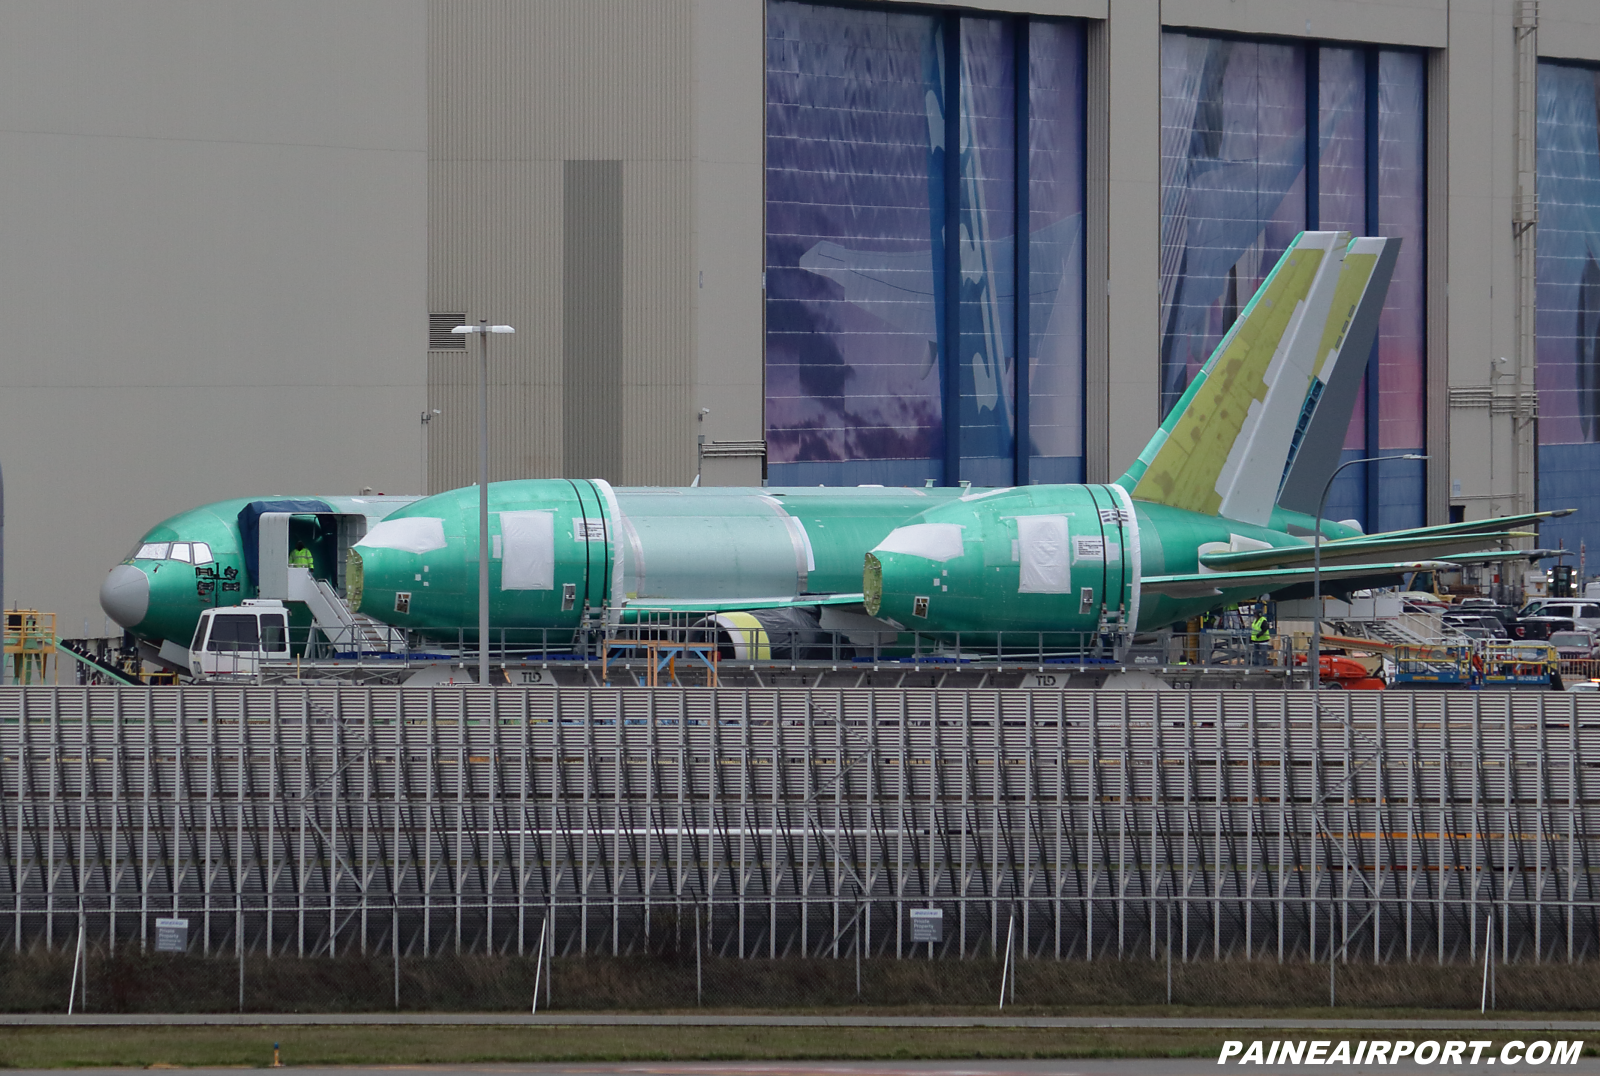 China Central Longhao Airlines 767 at KPAE Paine Field